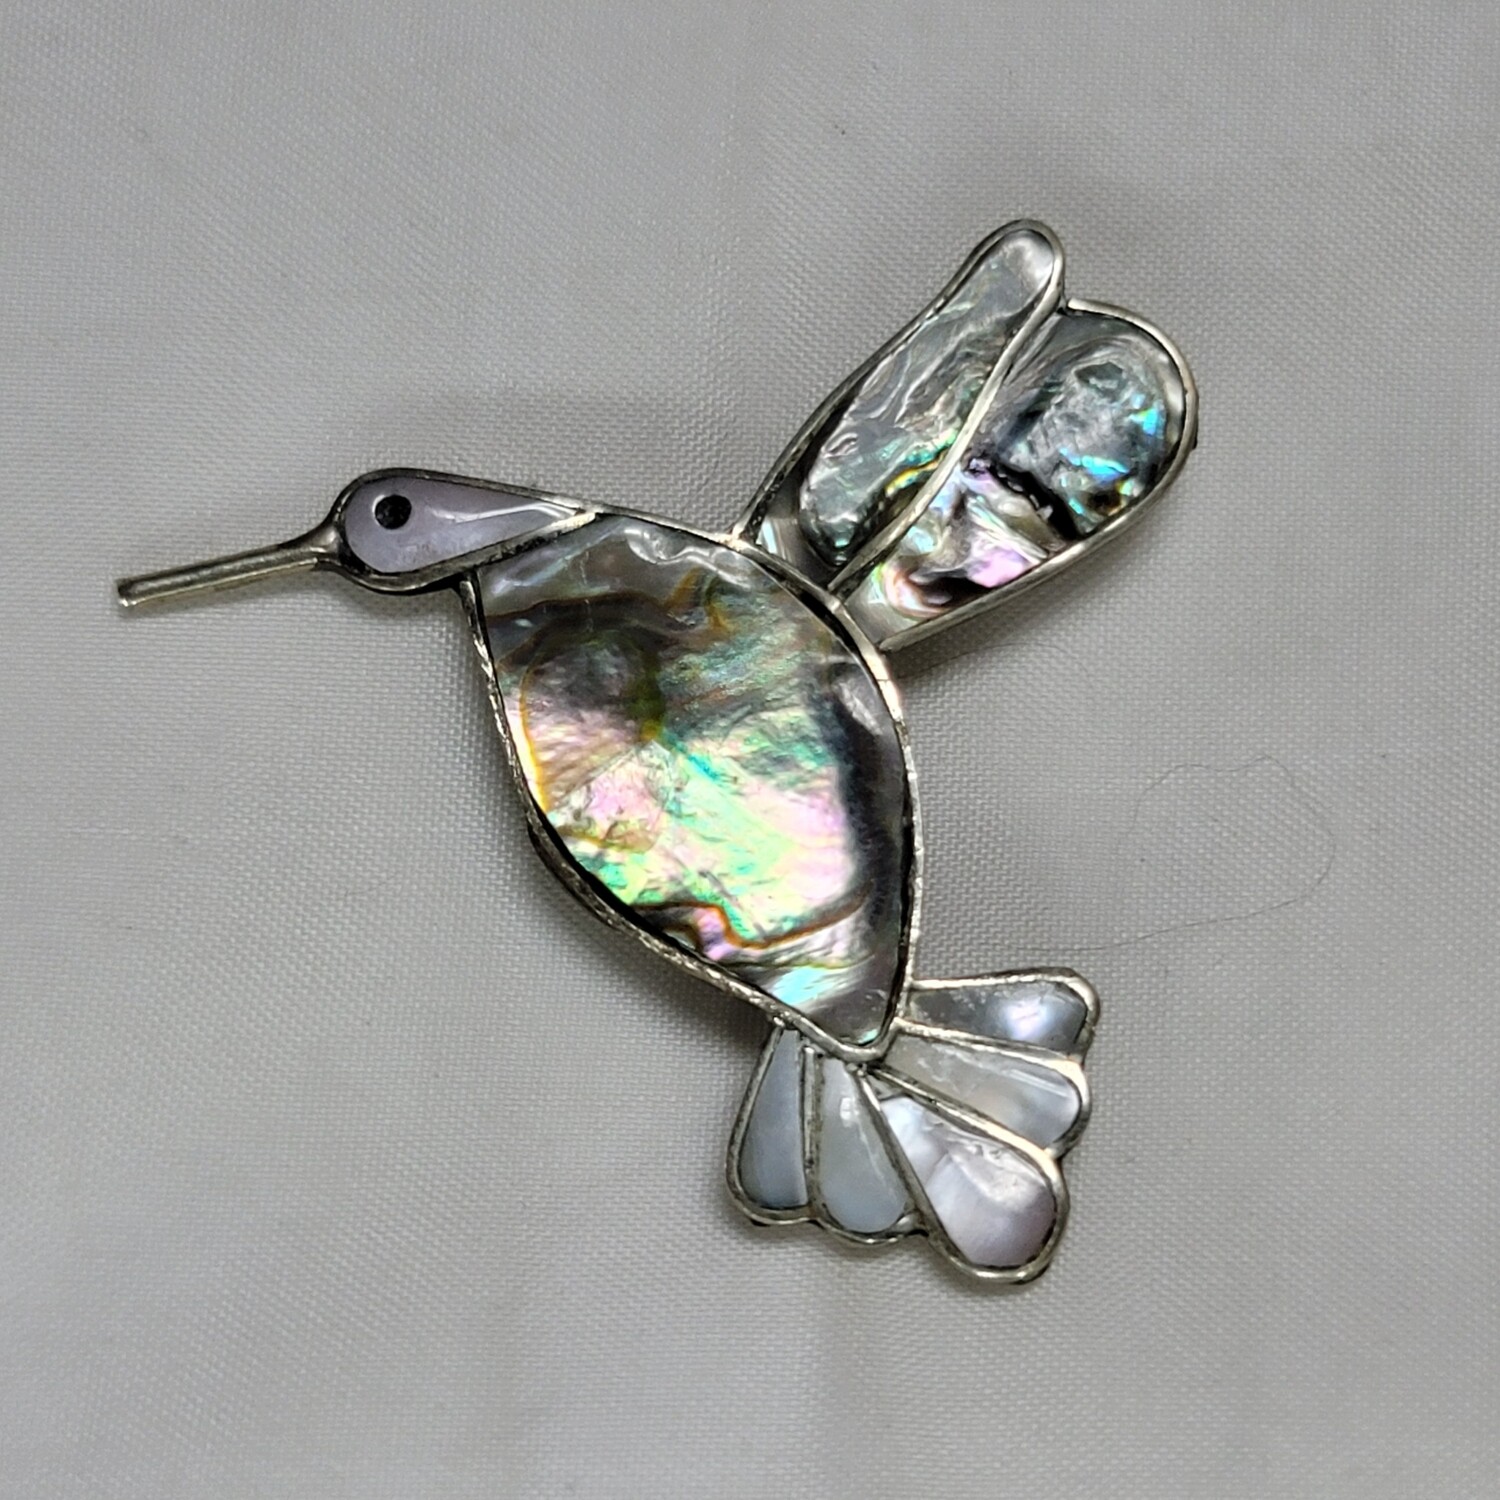 Vintage Abalone and Silver Hummel Pendent or Brooch